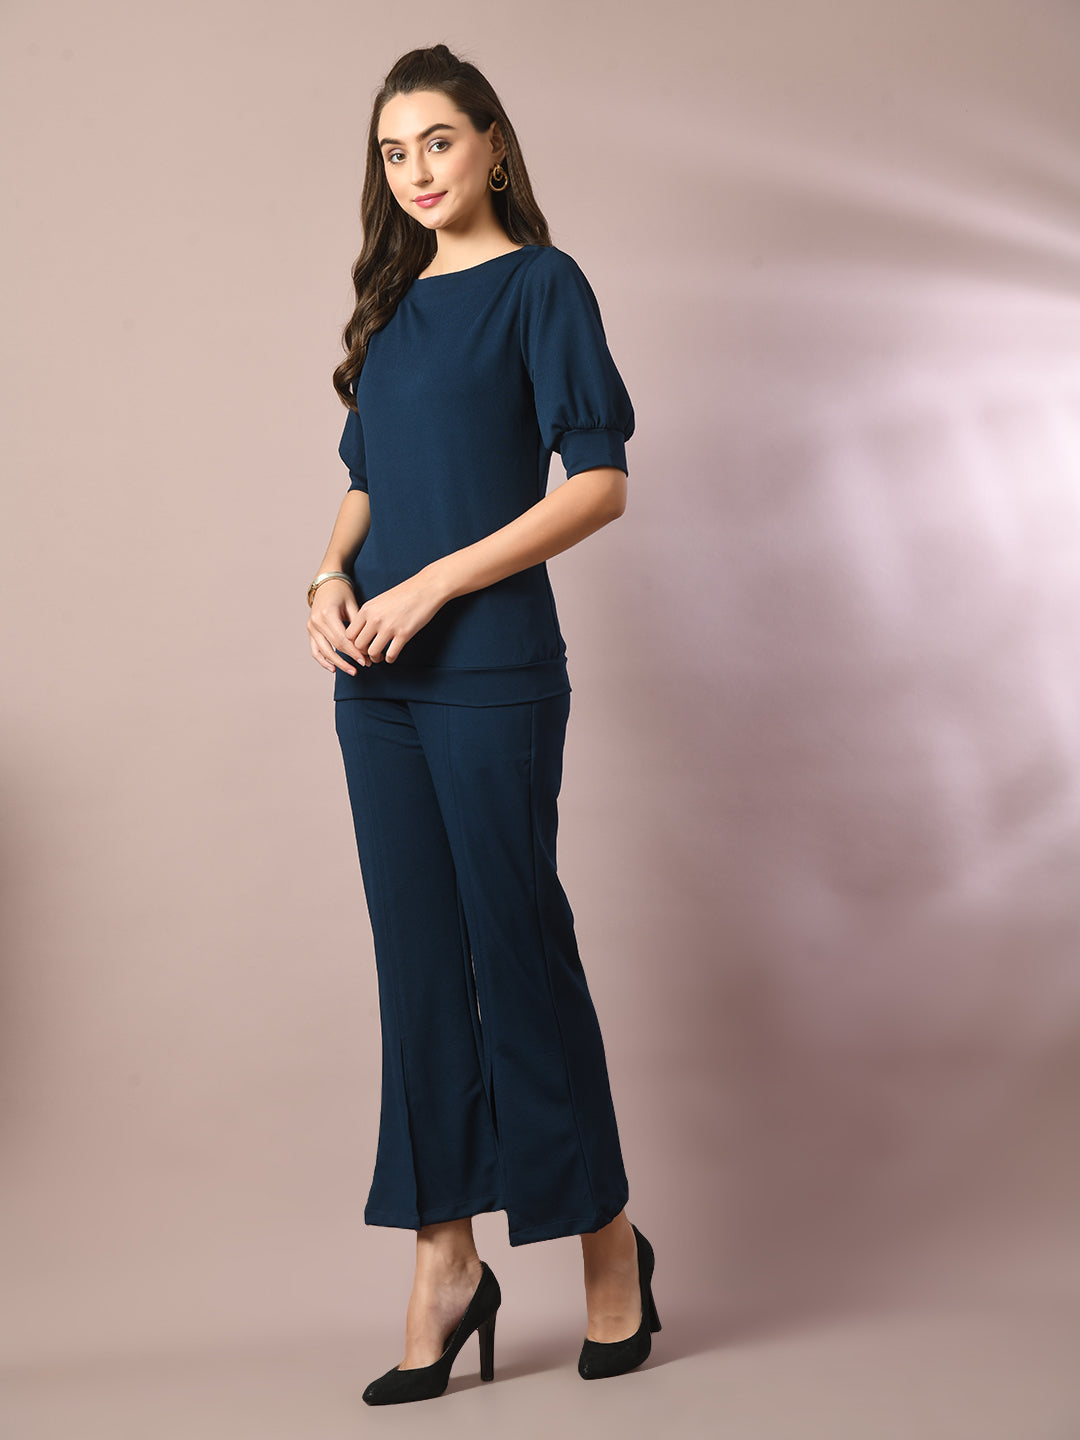 Women's  Blue Solid Party Parallel Trousers   - Myshka